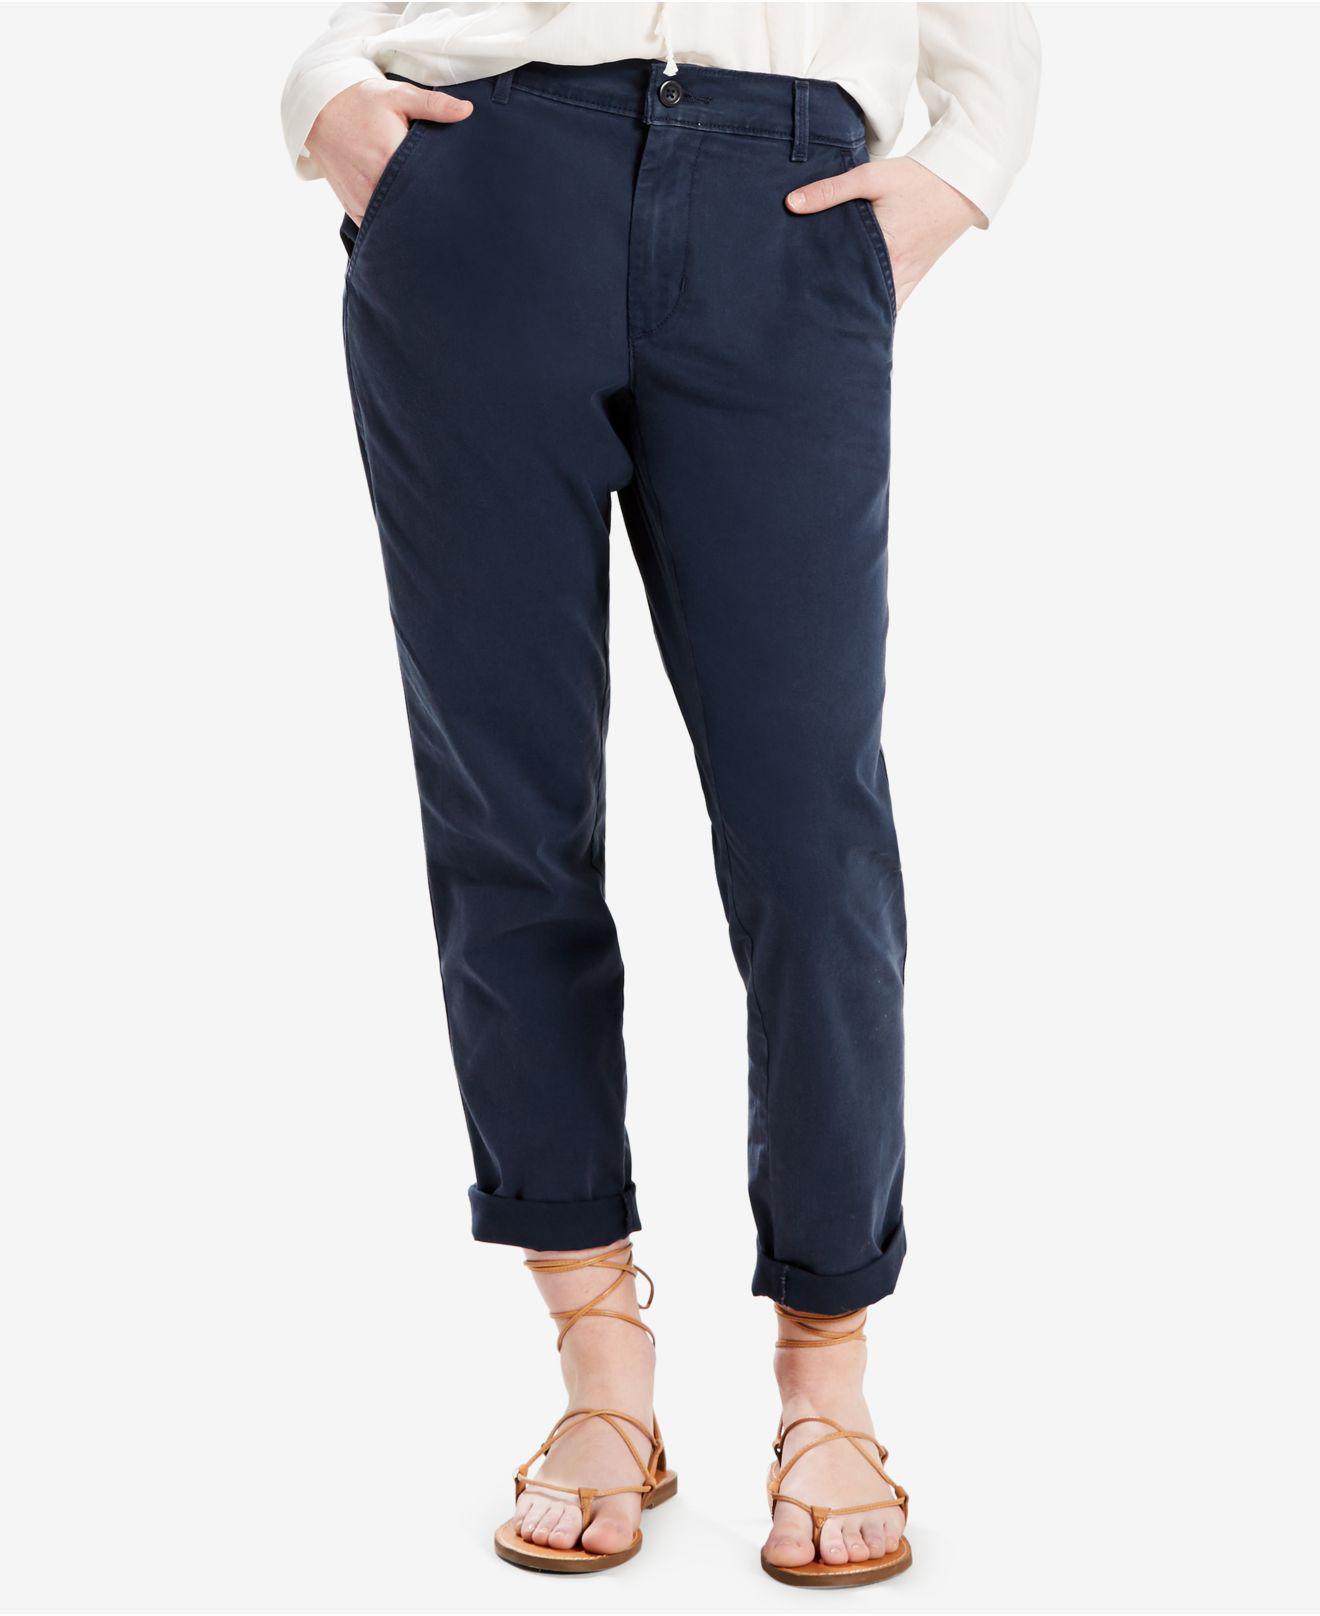 Levi's Cotton Twill Chino Pants in Navy (Blue) - Lyst